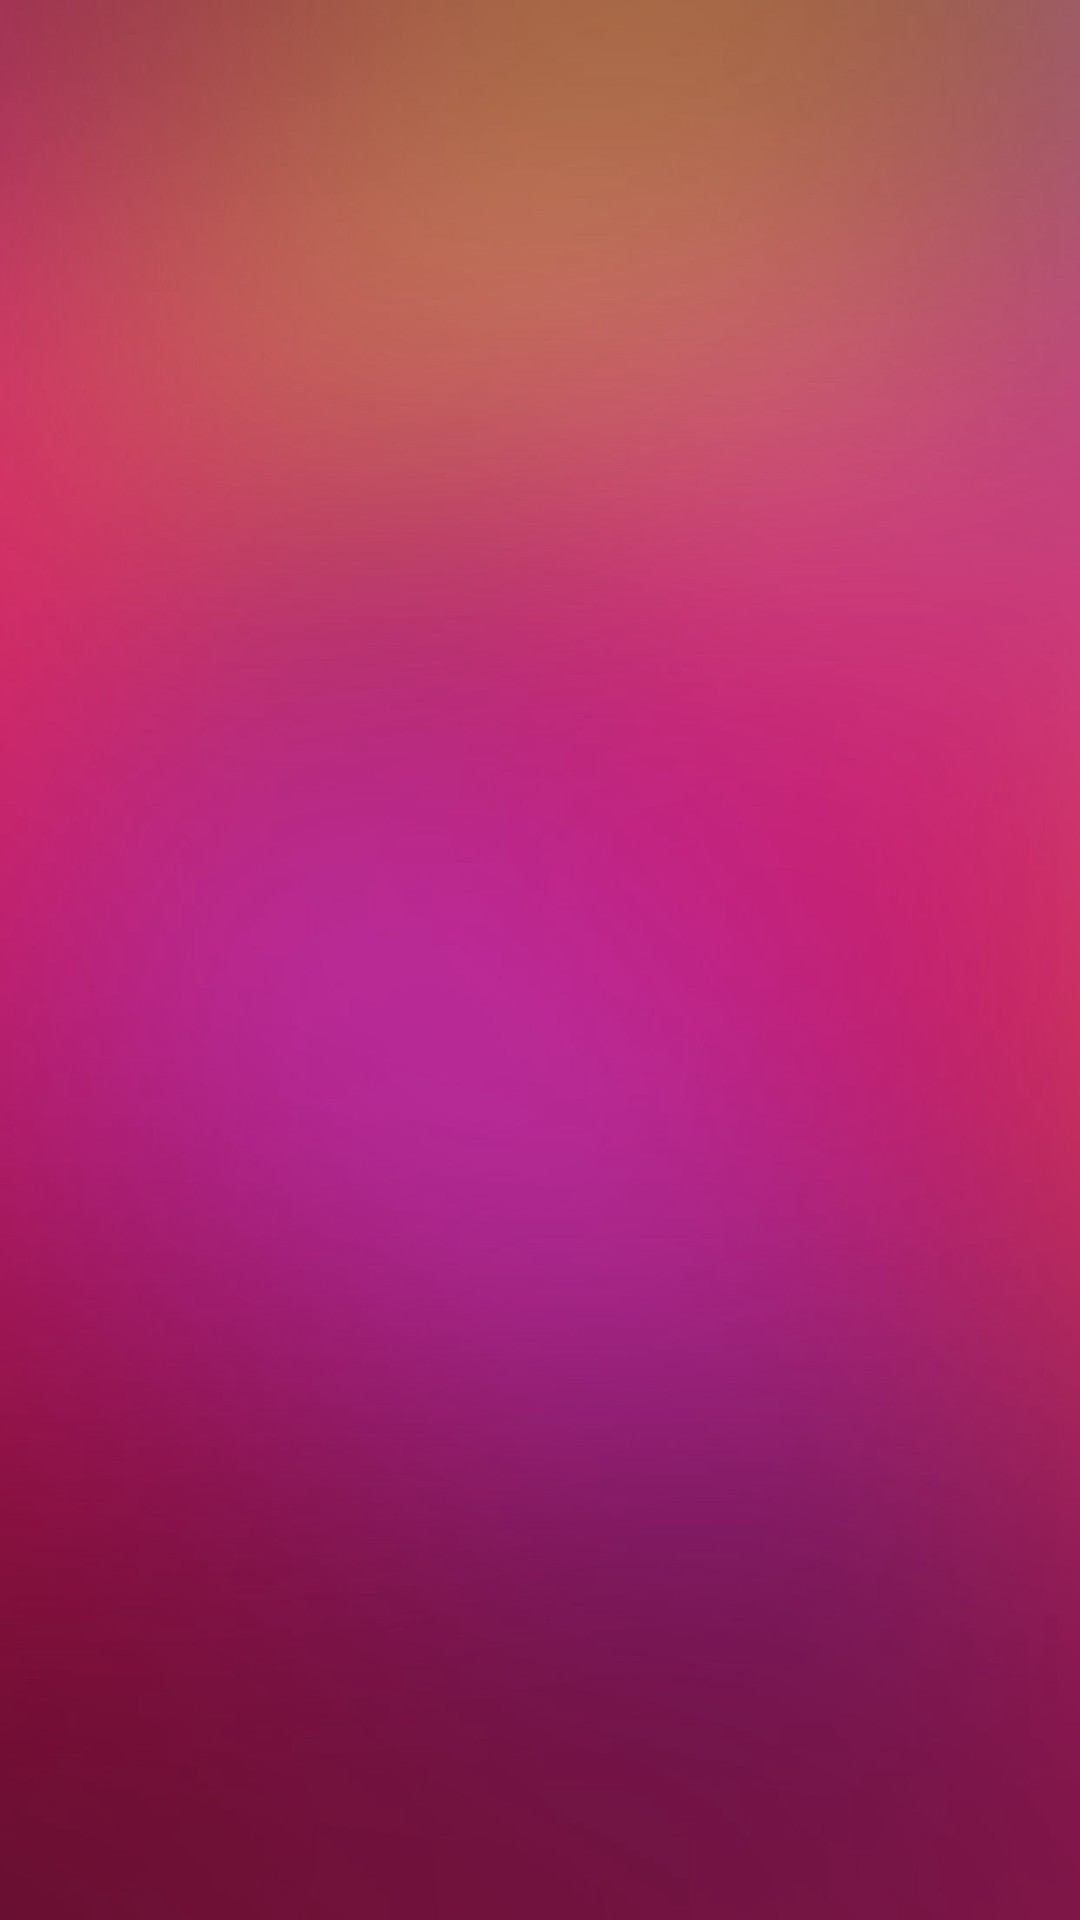 Explore Pink Wallpaper For Iphone and more